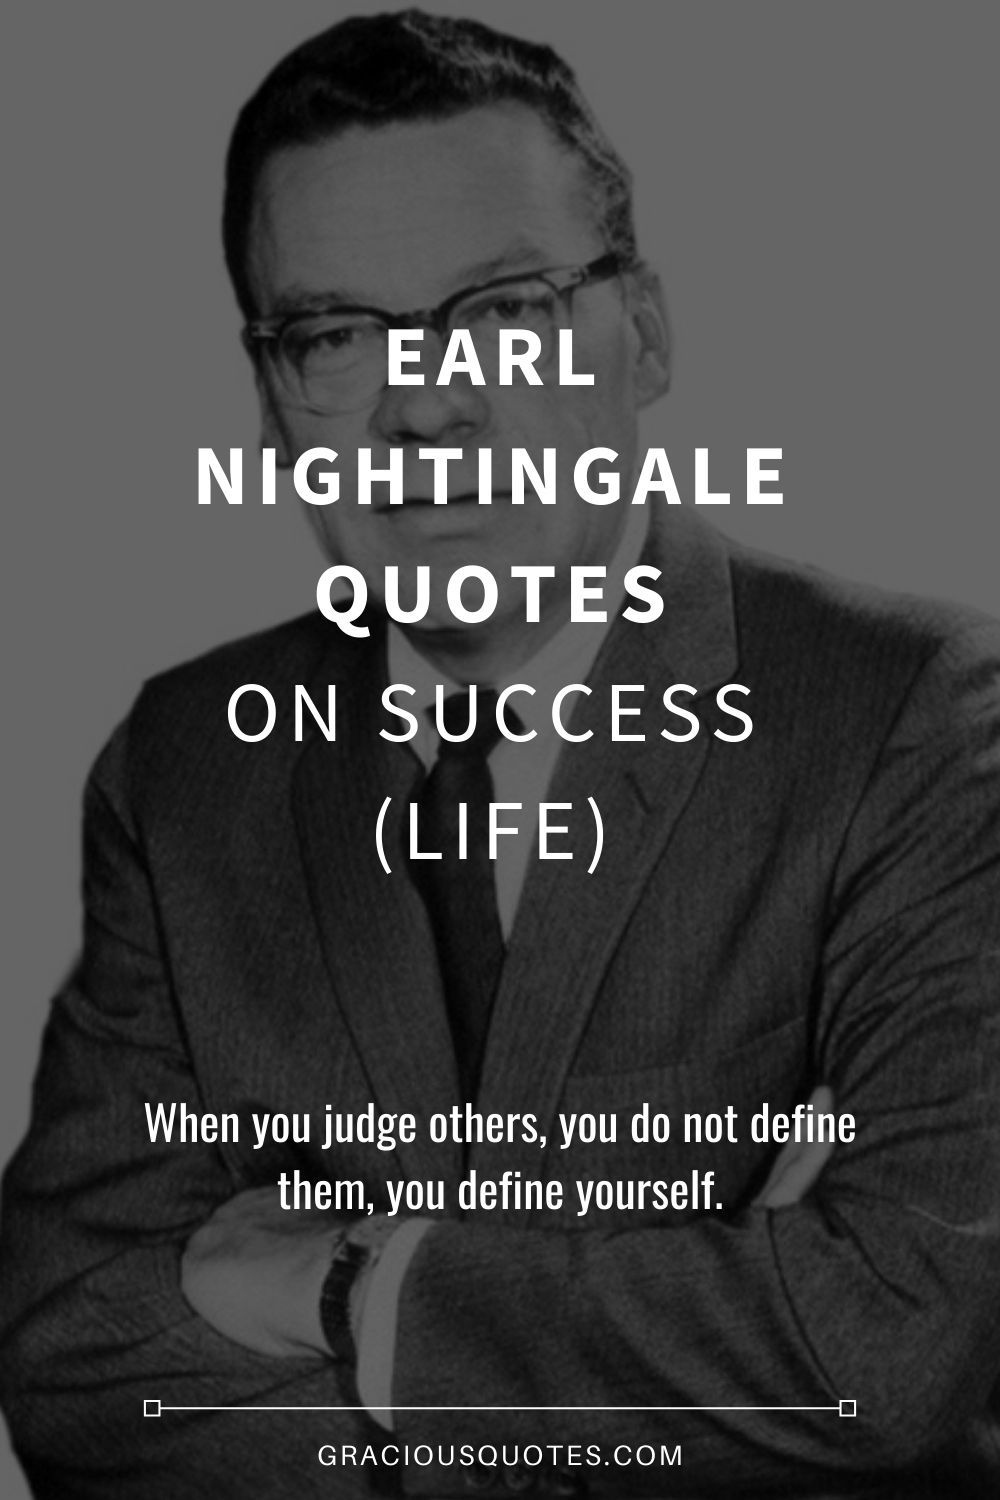 Earl Nightingale Quotes on Success LIFE Gracious Quotes